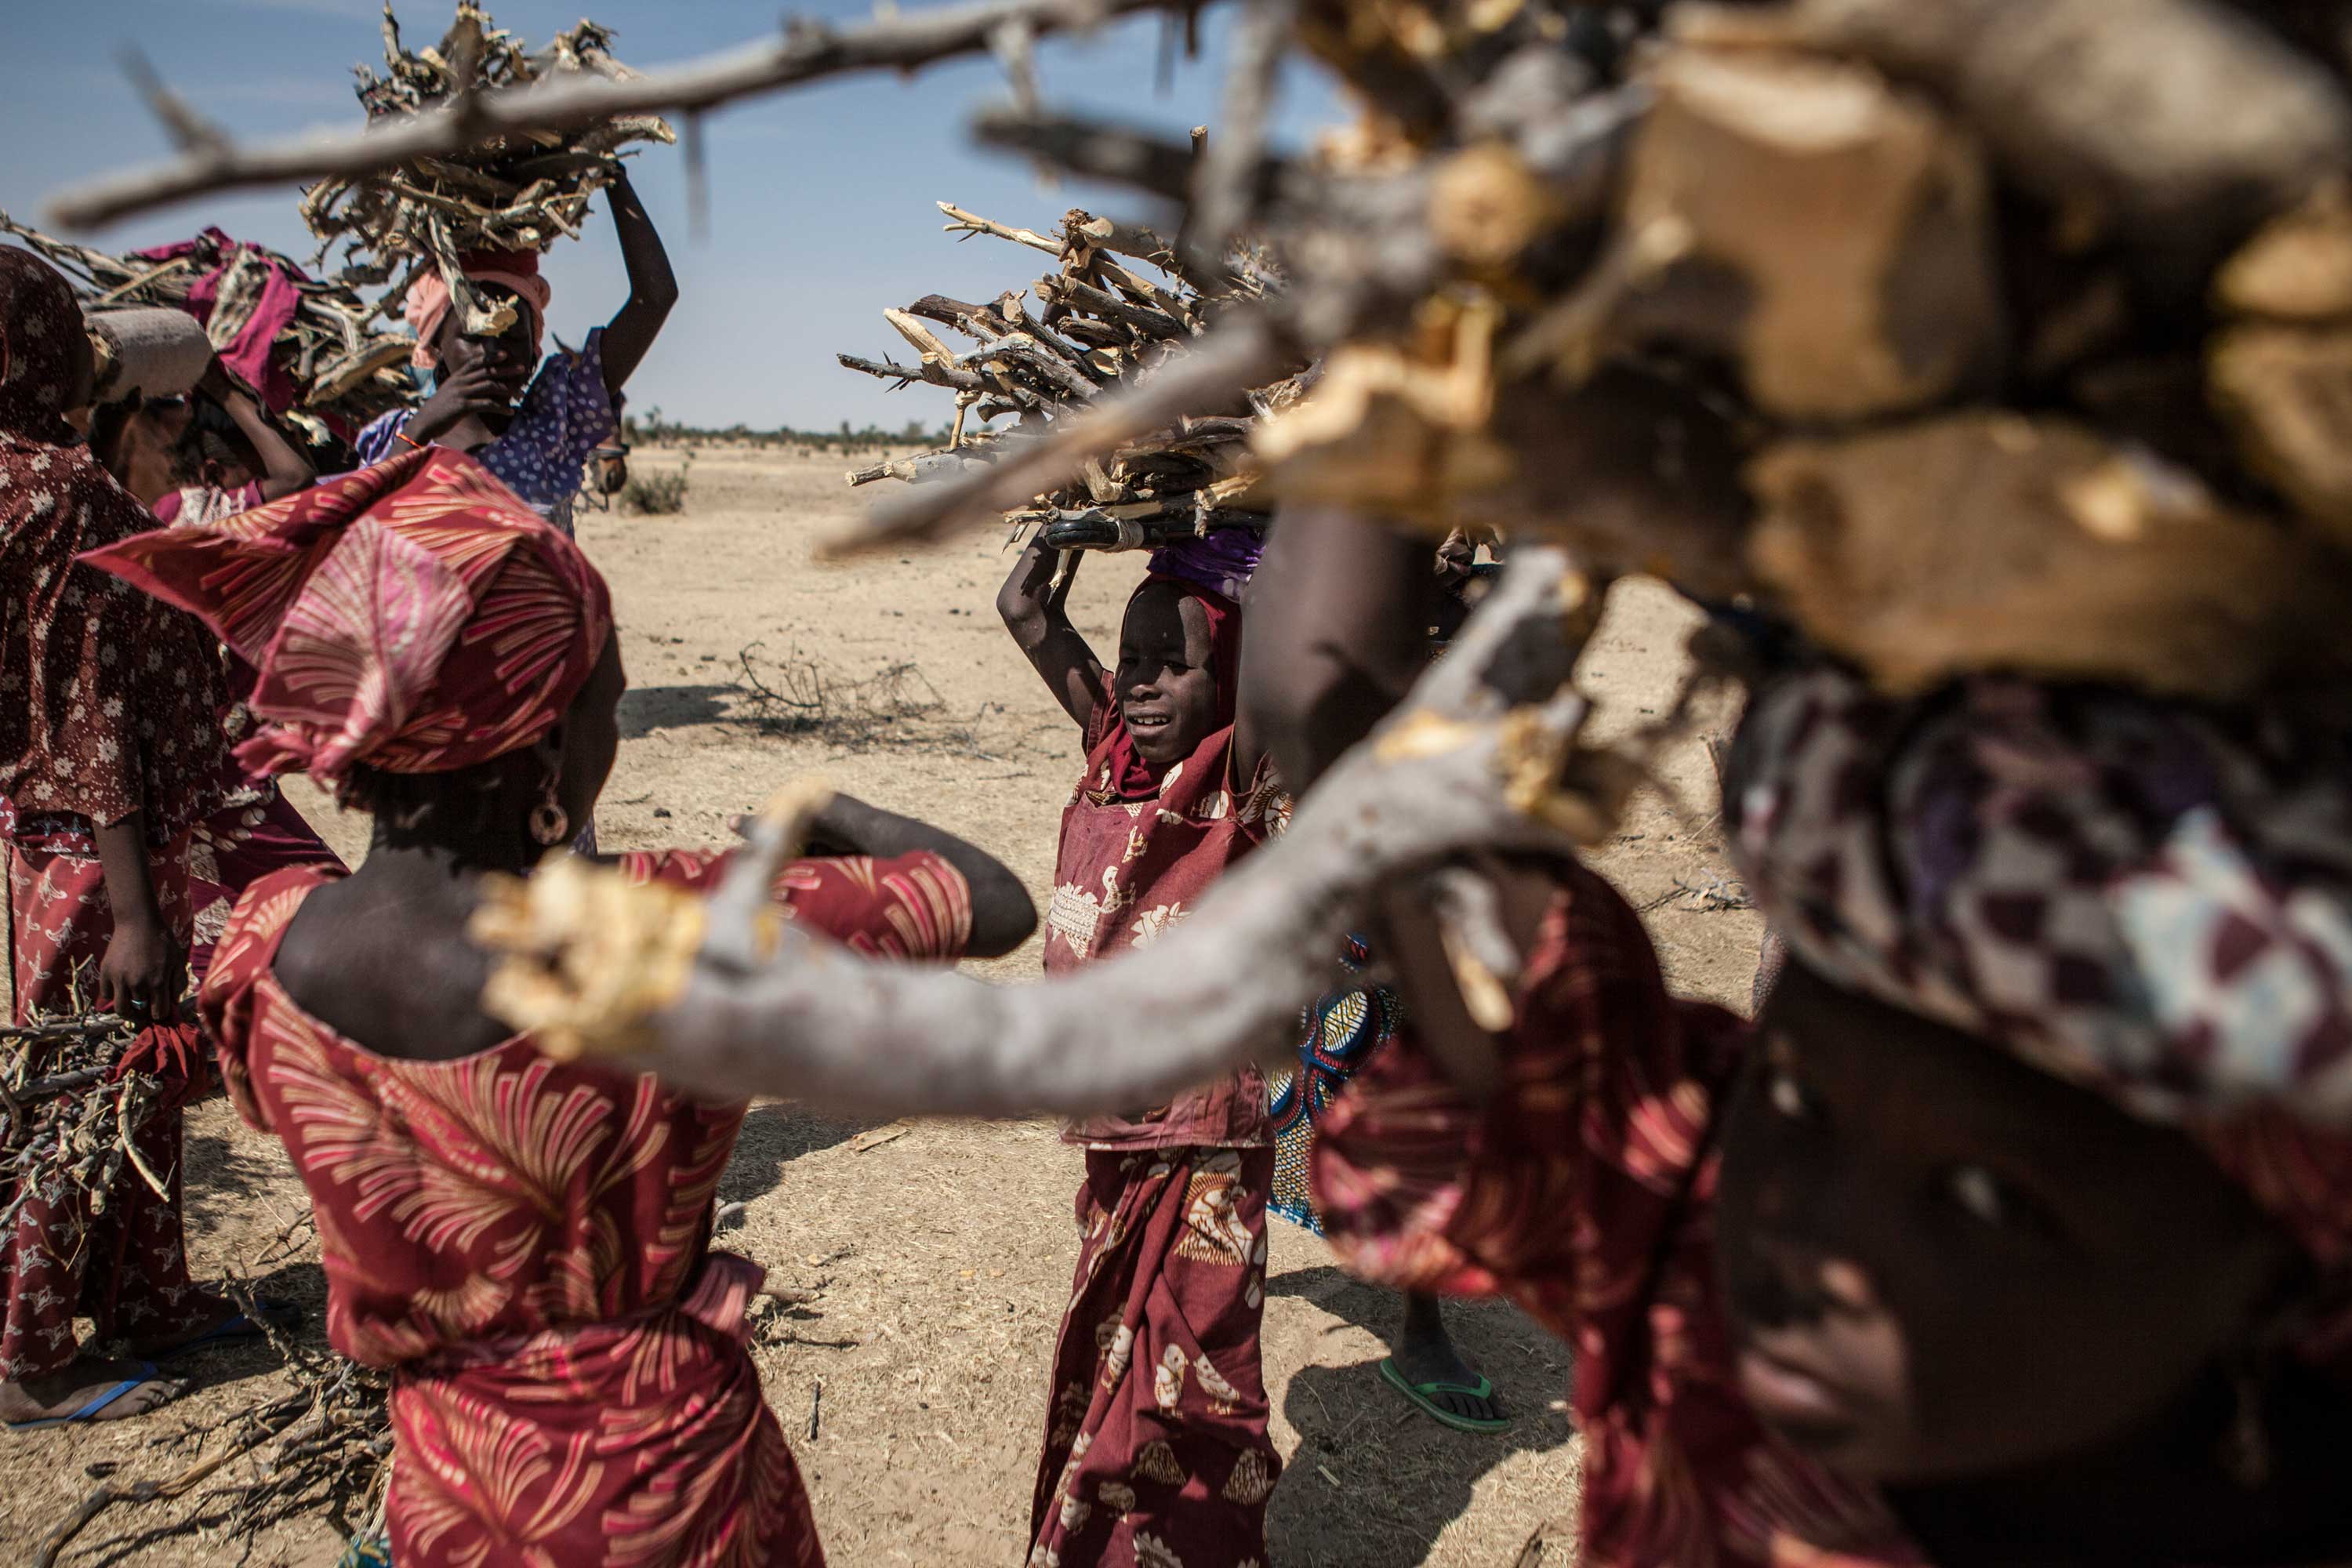 A group of girls, originally from Nigeria, carry remaining branches and shrubbery from trees that have been cut by other refugees outside of Guam Guam Camp in Diffa, Niger.